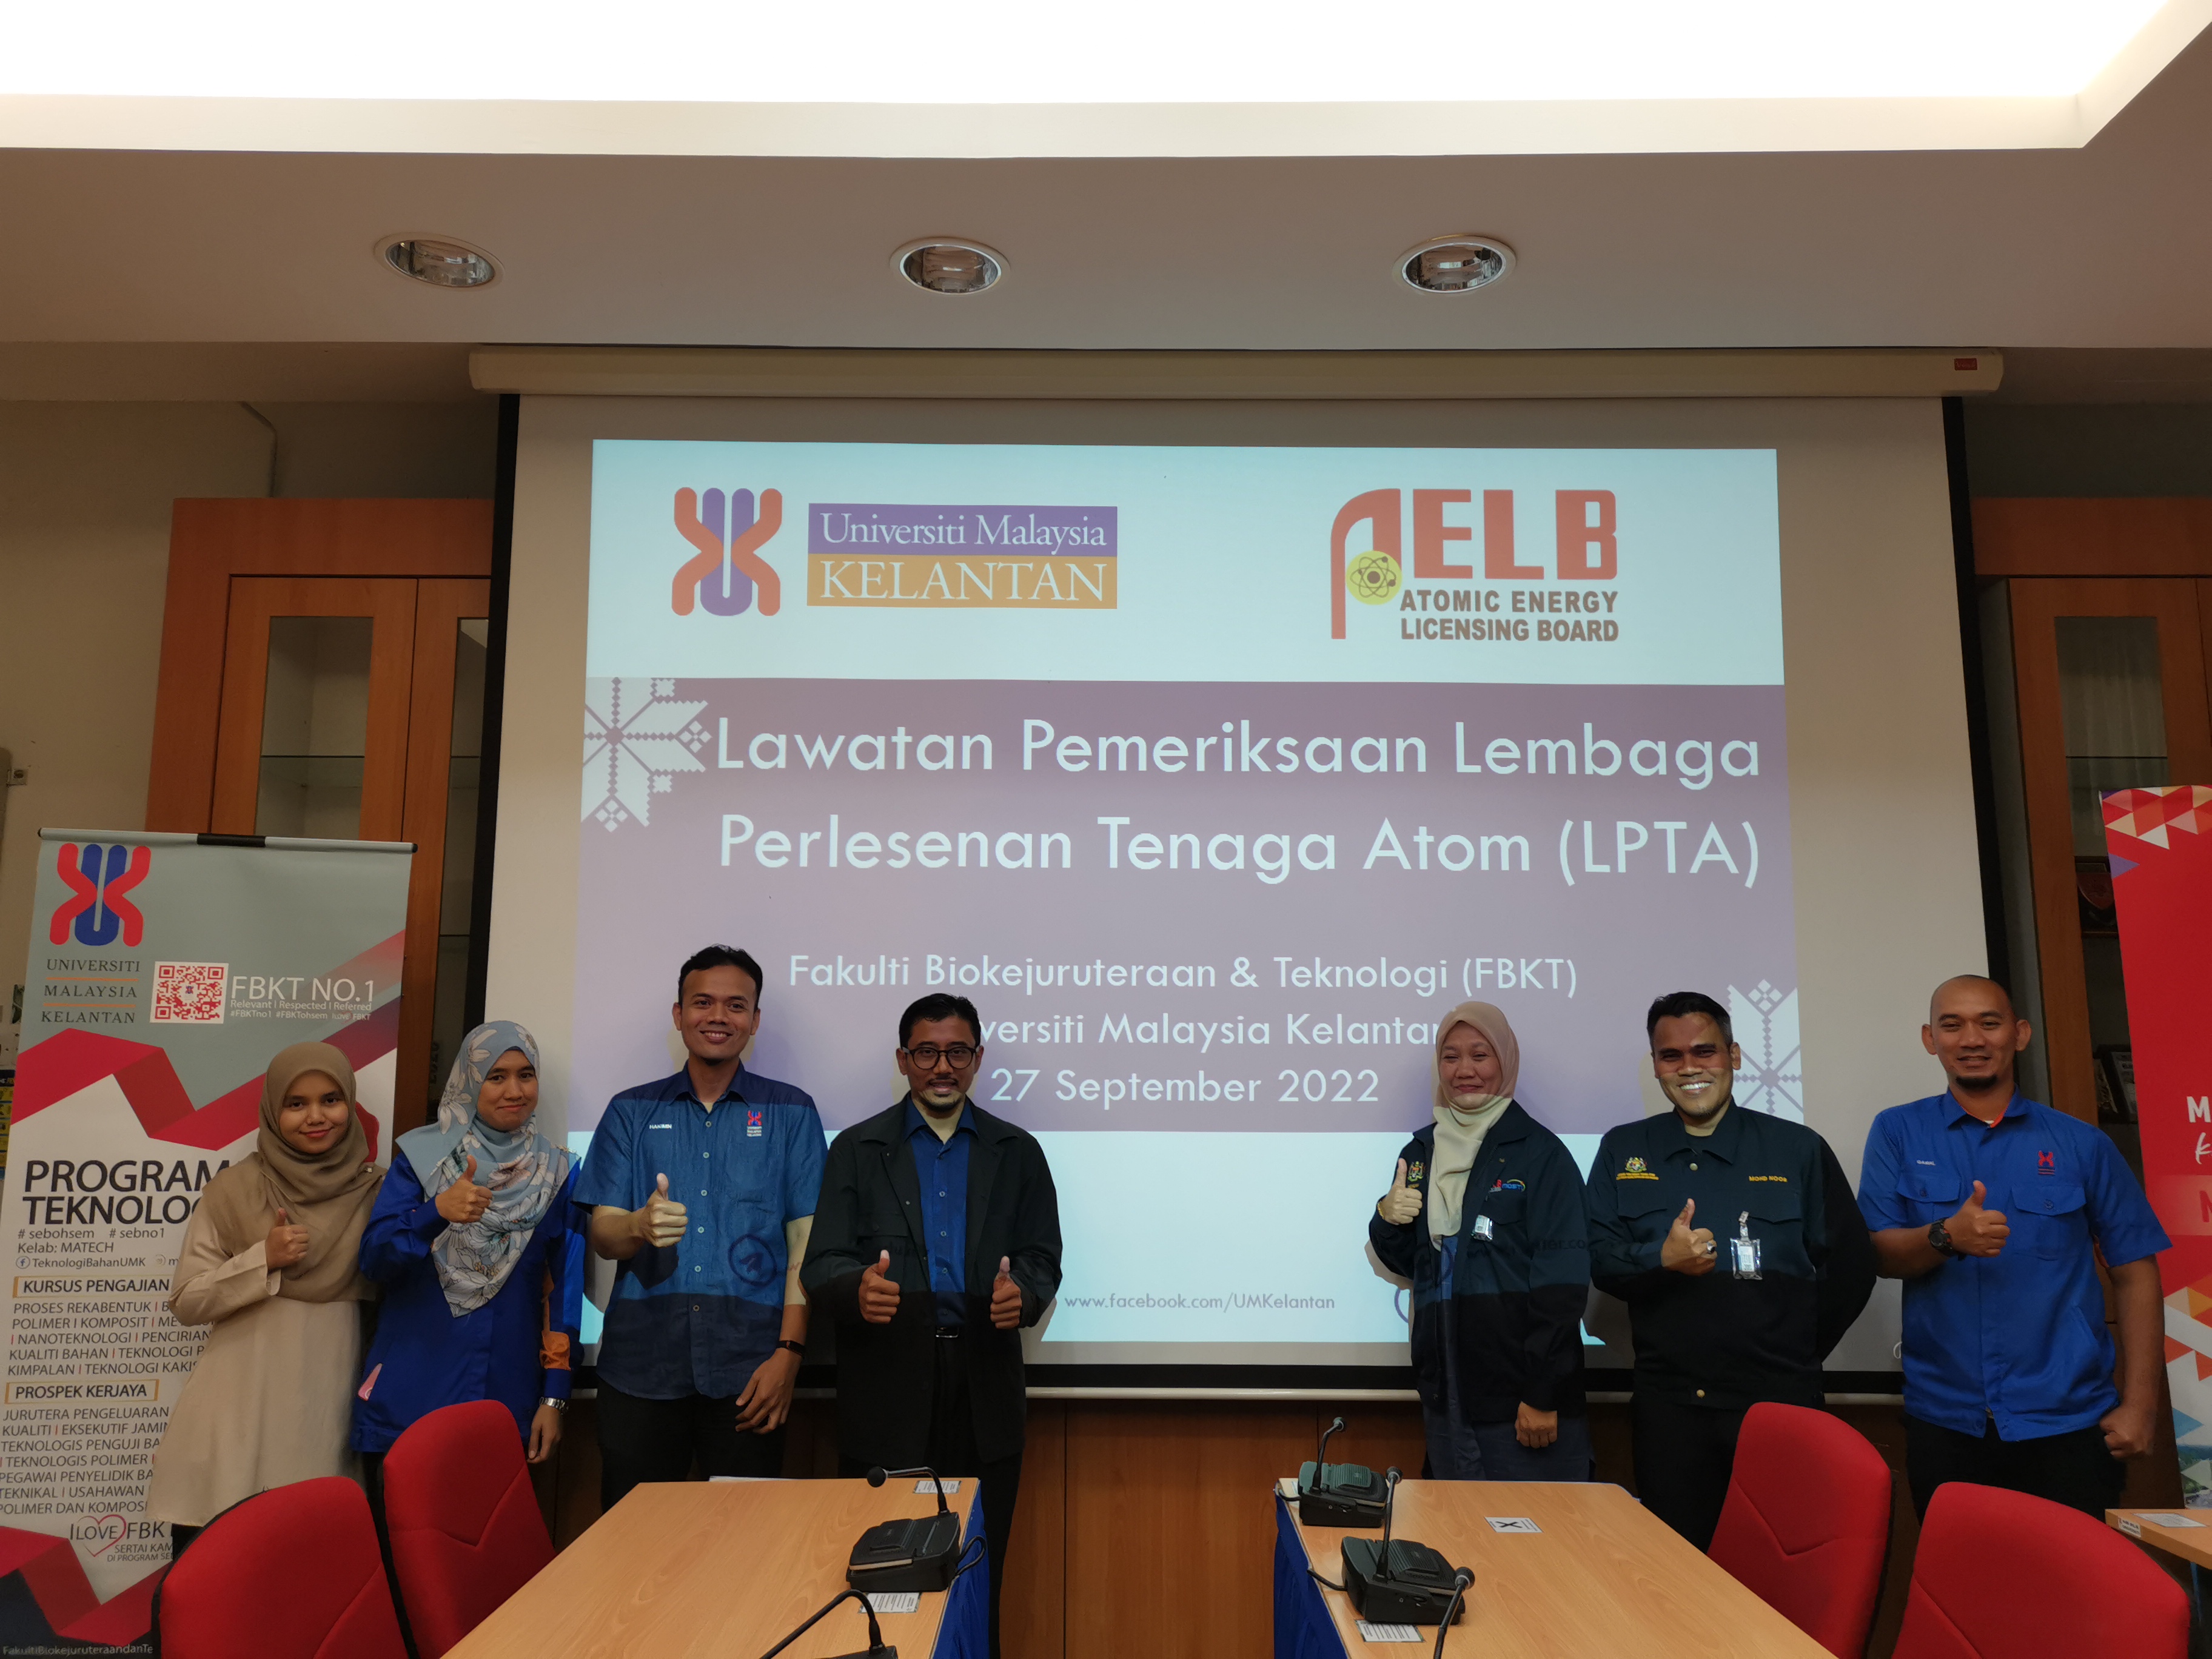  Inspection Visit of the Atomic Energy Licensing Board to the Faculty of Bioengineering and Technology, Universiti Malaysia Kelantan